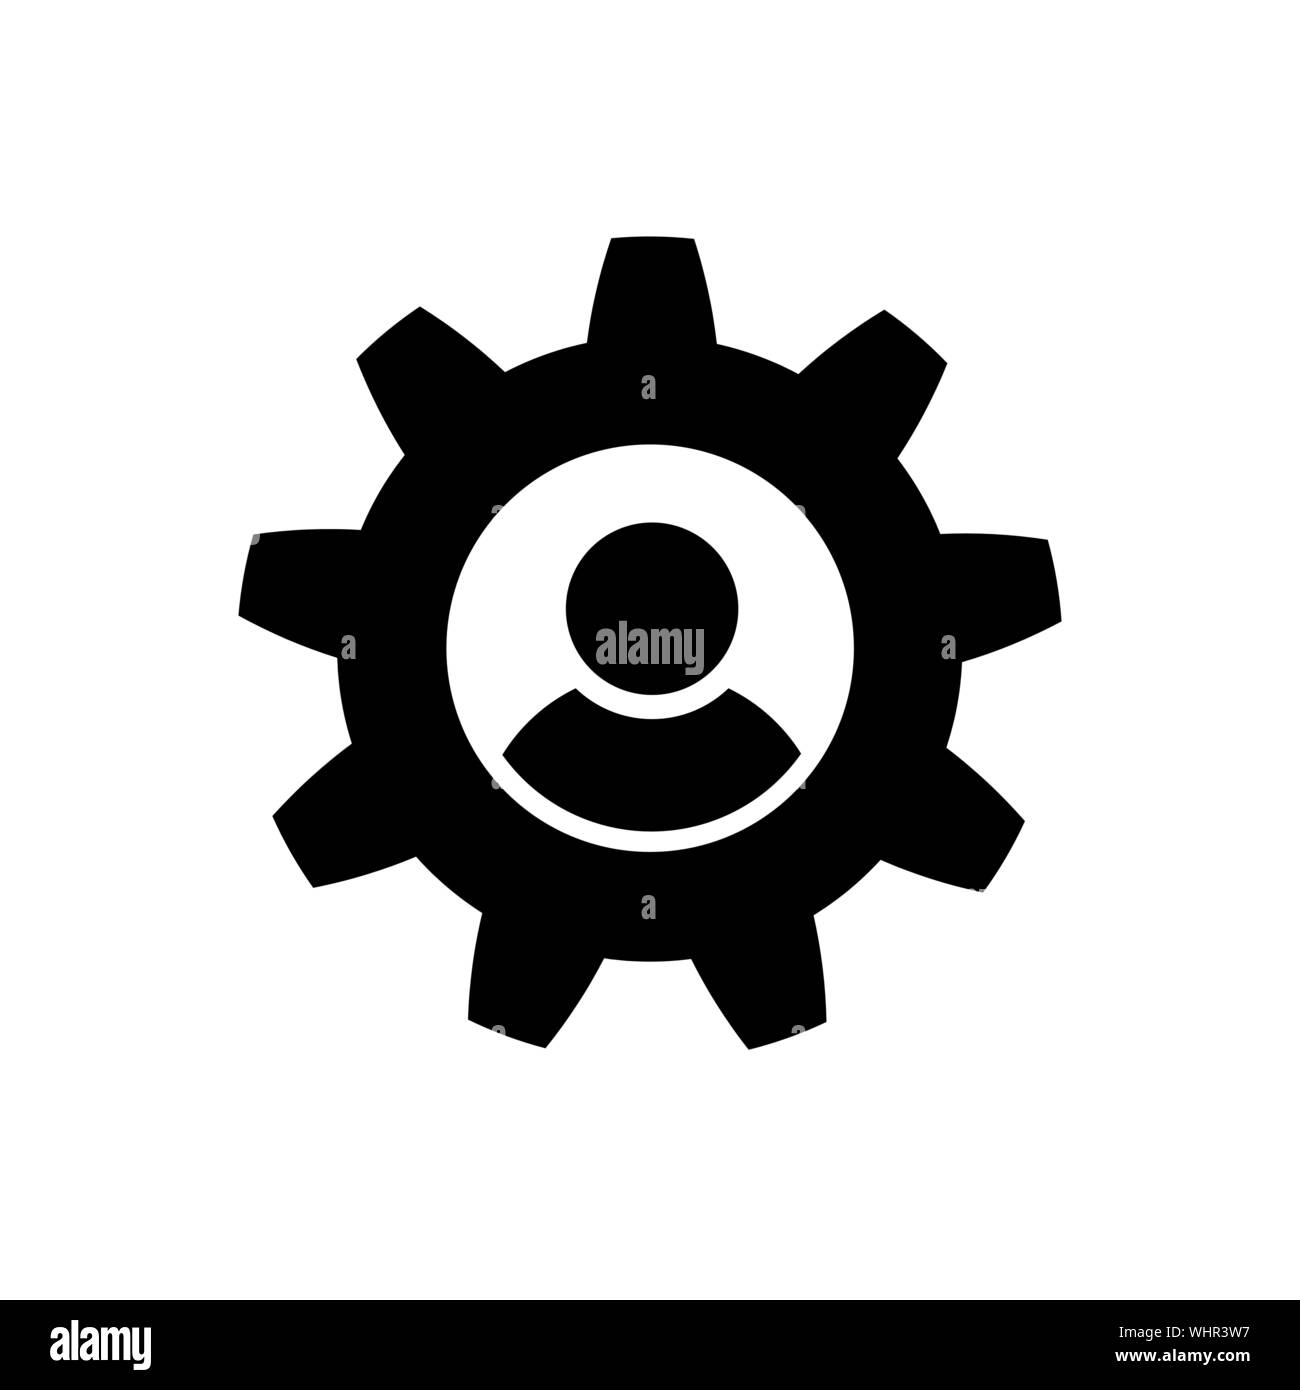 Man and cog icon in flat style. Process flat symbol isolated on white background. Man and gear icon. Abstract simple process icon in black. Vector ill Stock Vector